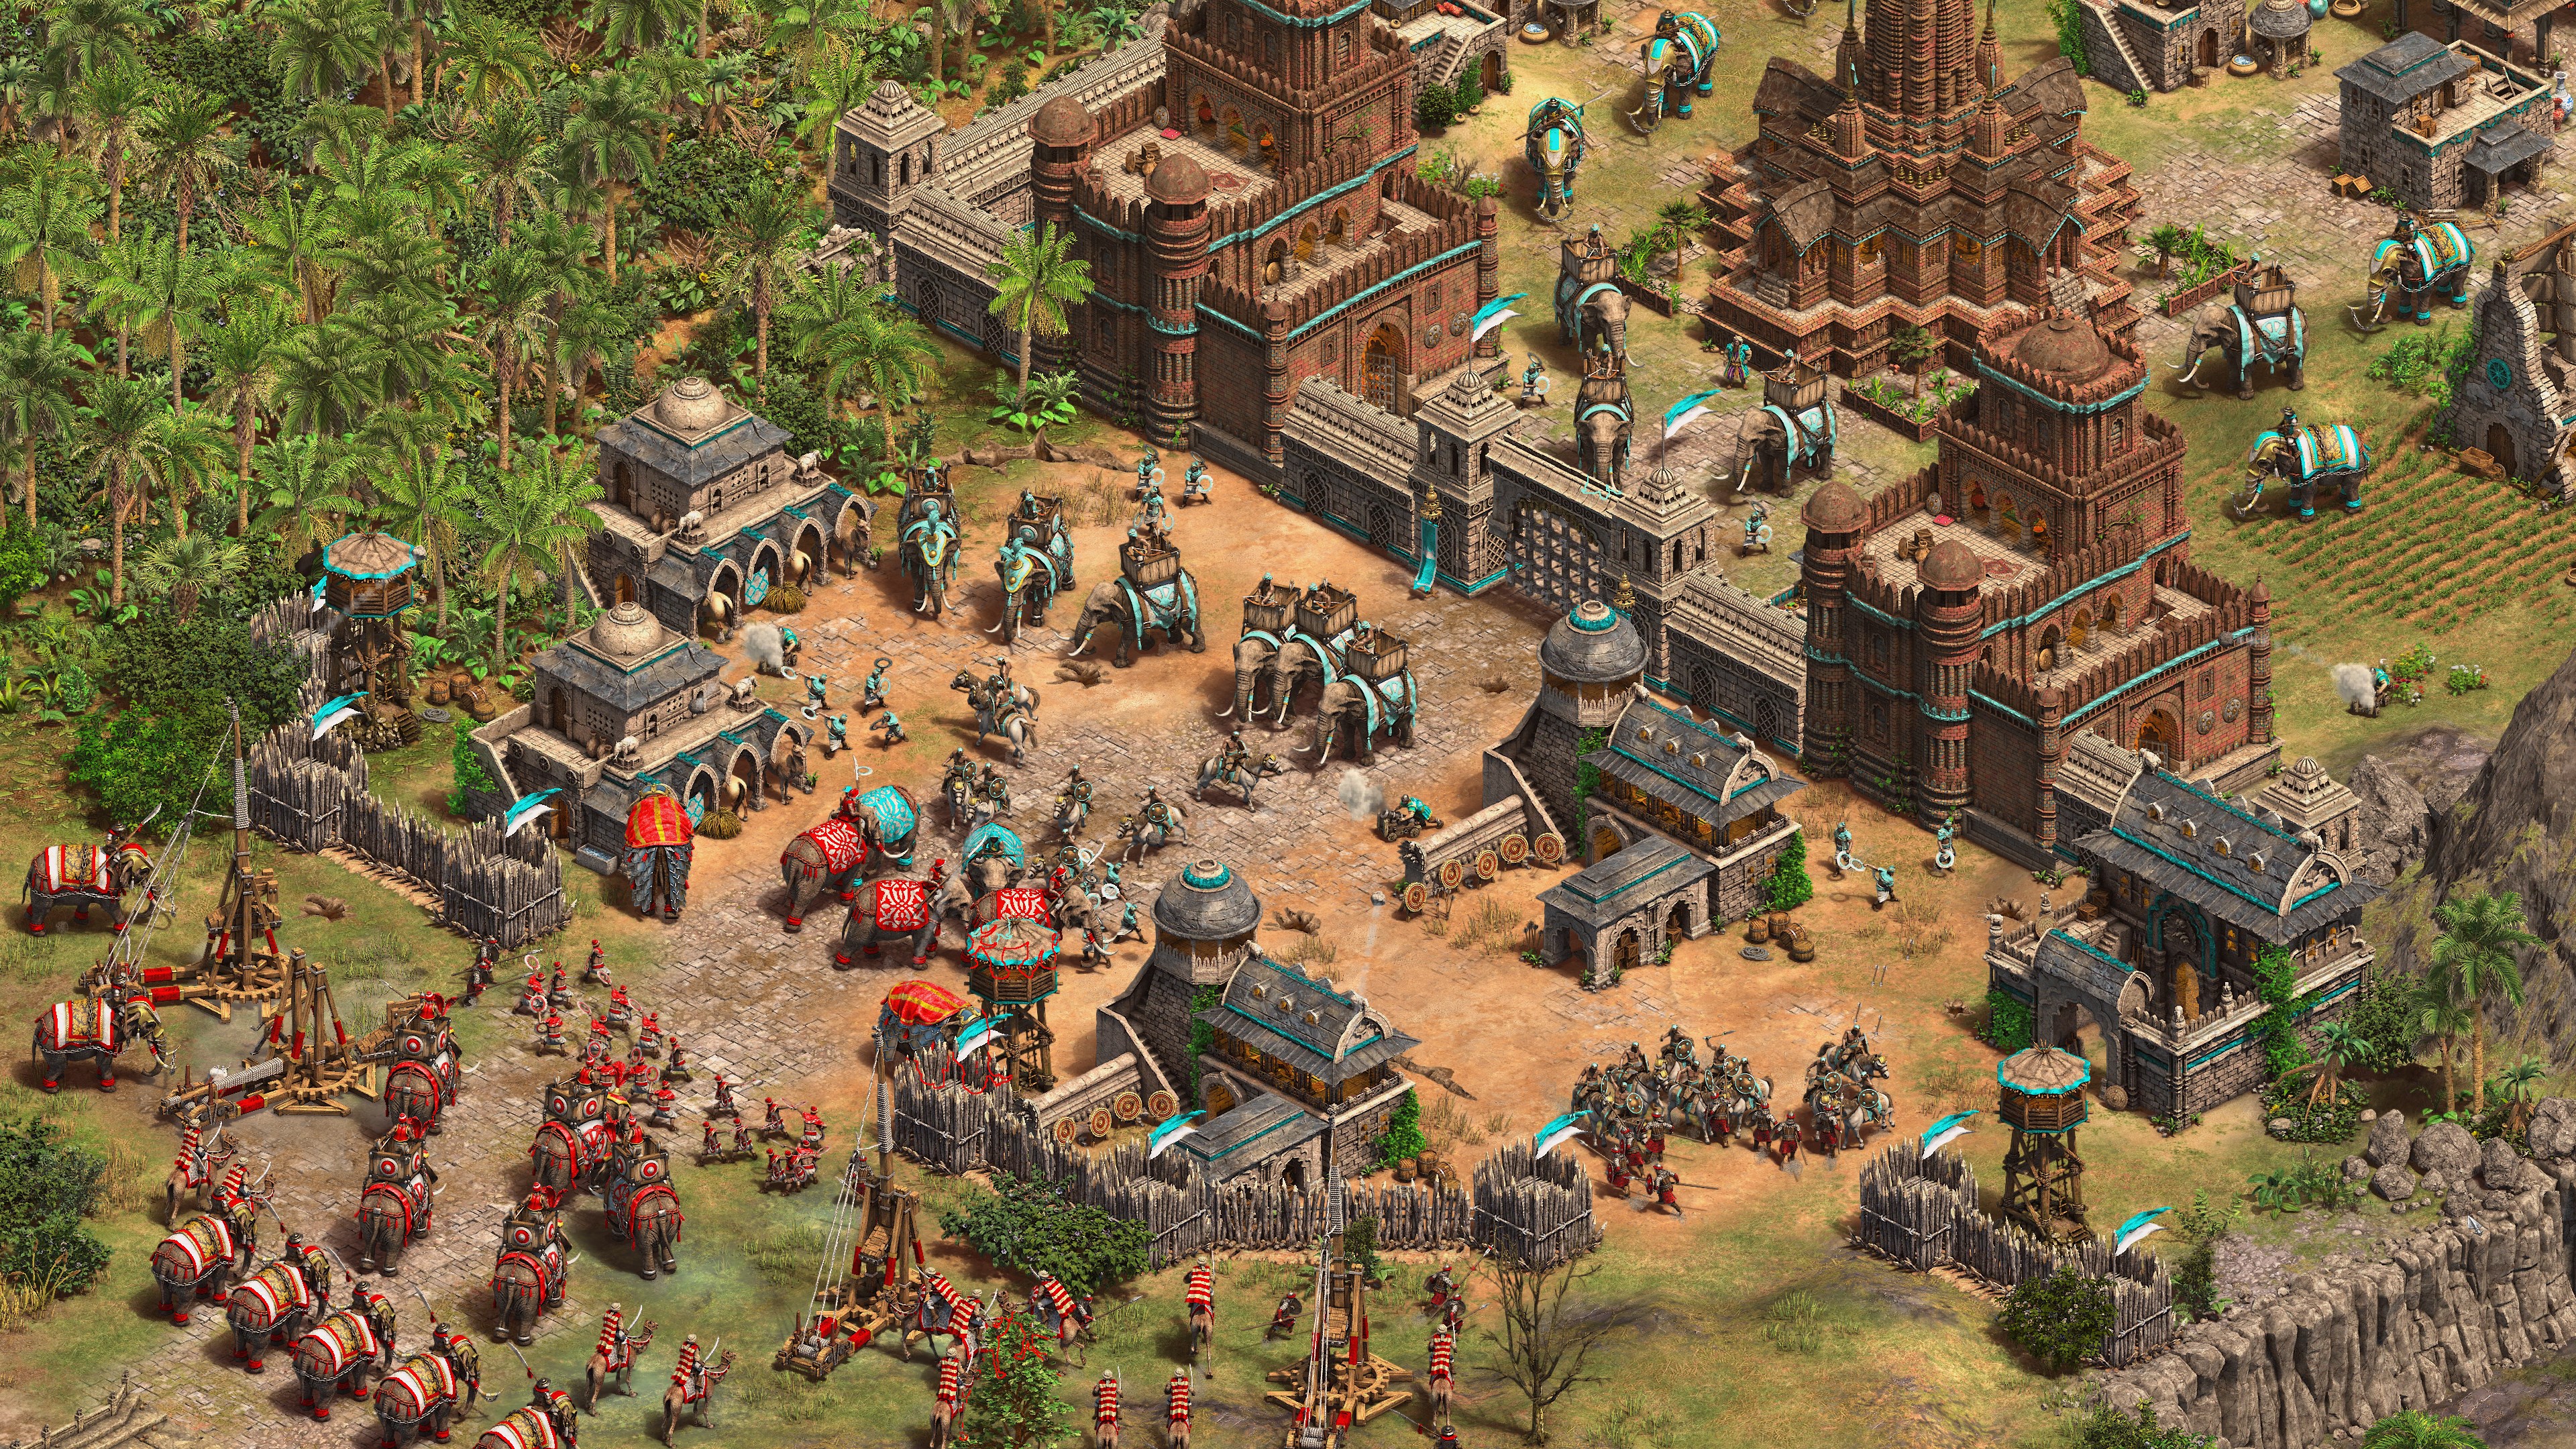 Age of Empires II: Definitive Edition - Dynasties of India screenshot 45684